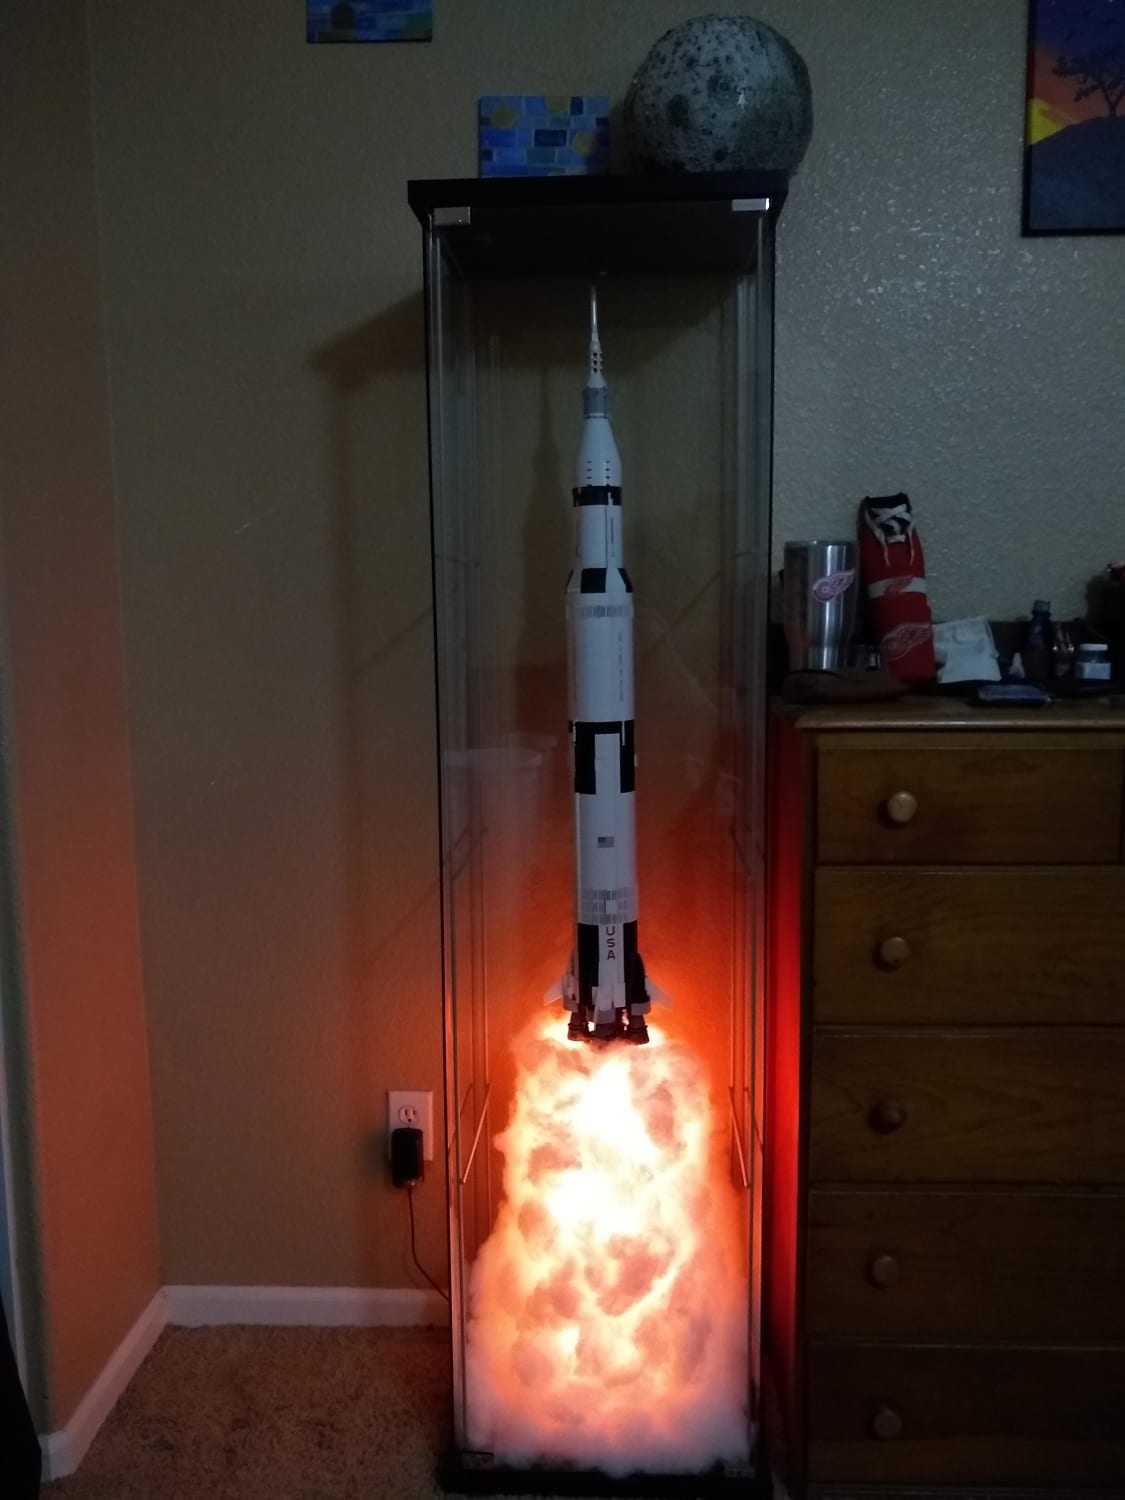 Finally finished my Saturn V display! Thank you to everyone who posted this idea.